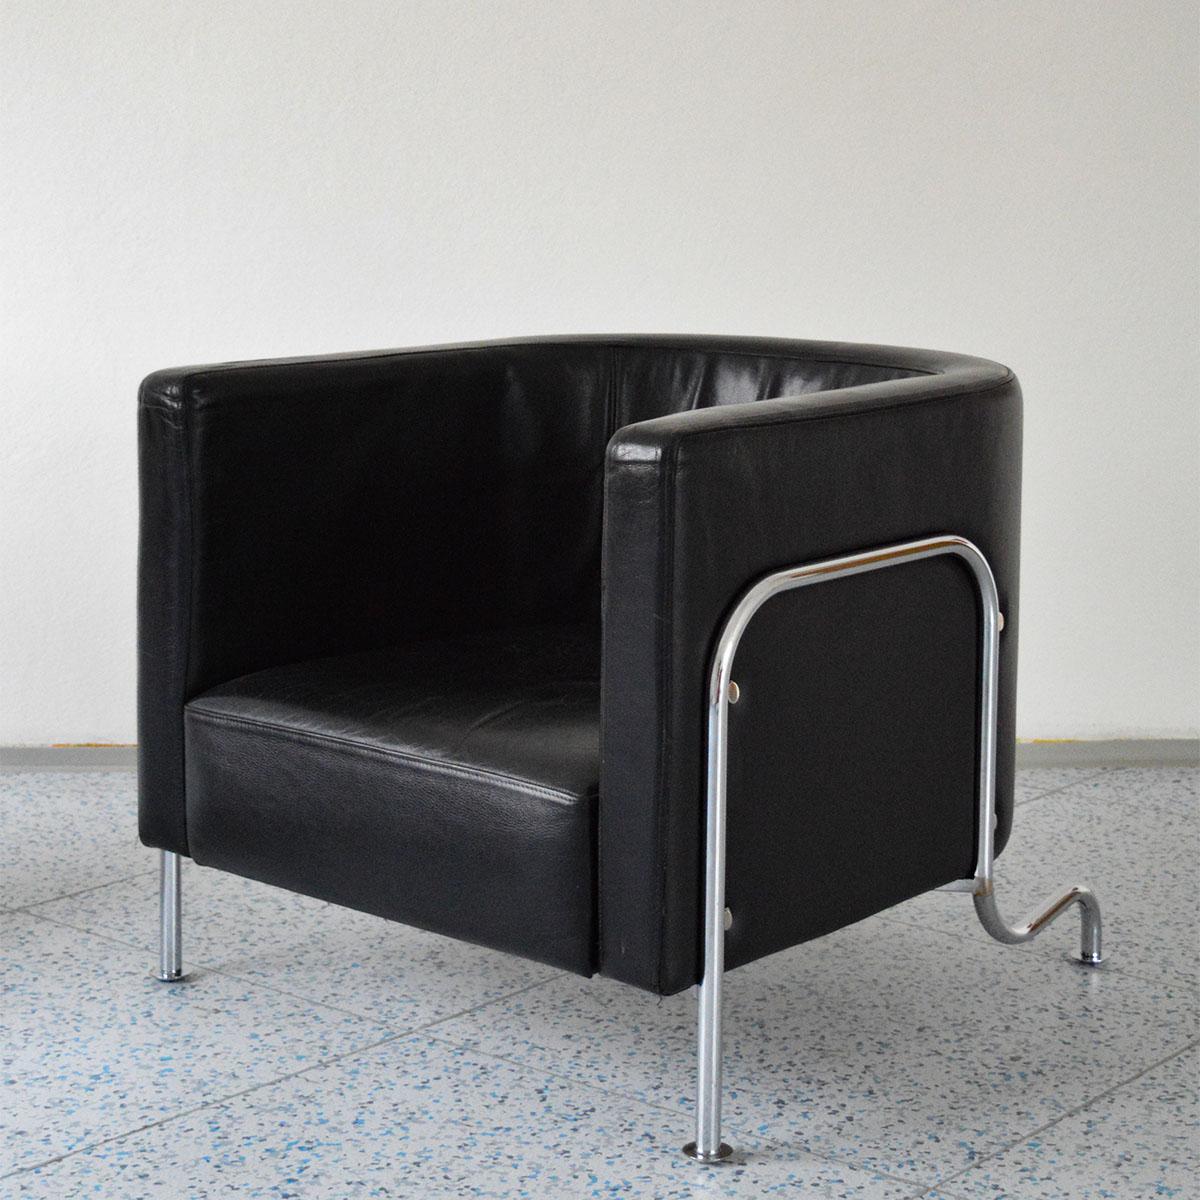 Lounge chair in black leather upholstery, model GA-2, designed by Erik Gunnar Asplund and produced by Källemo in Sweden, late 20th century.

This lounge chair features a magnificent round-shaped backrest and seat upholstered in black leather